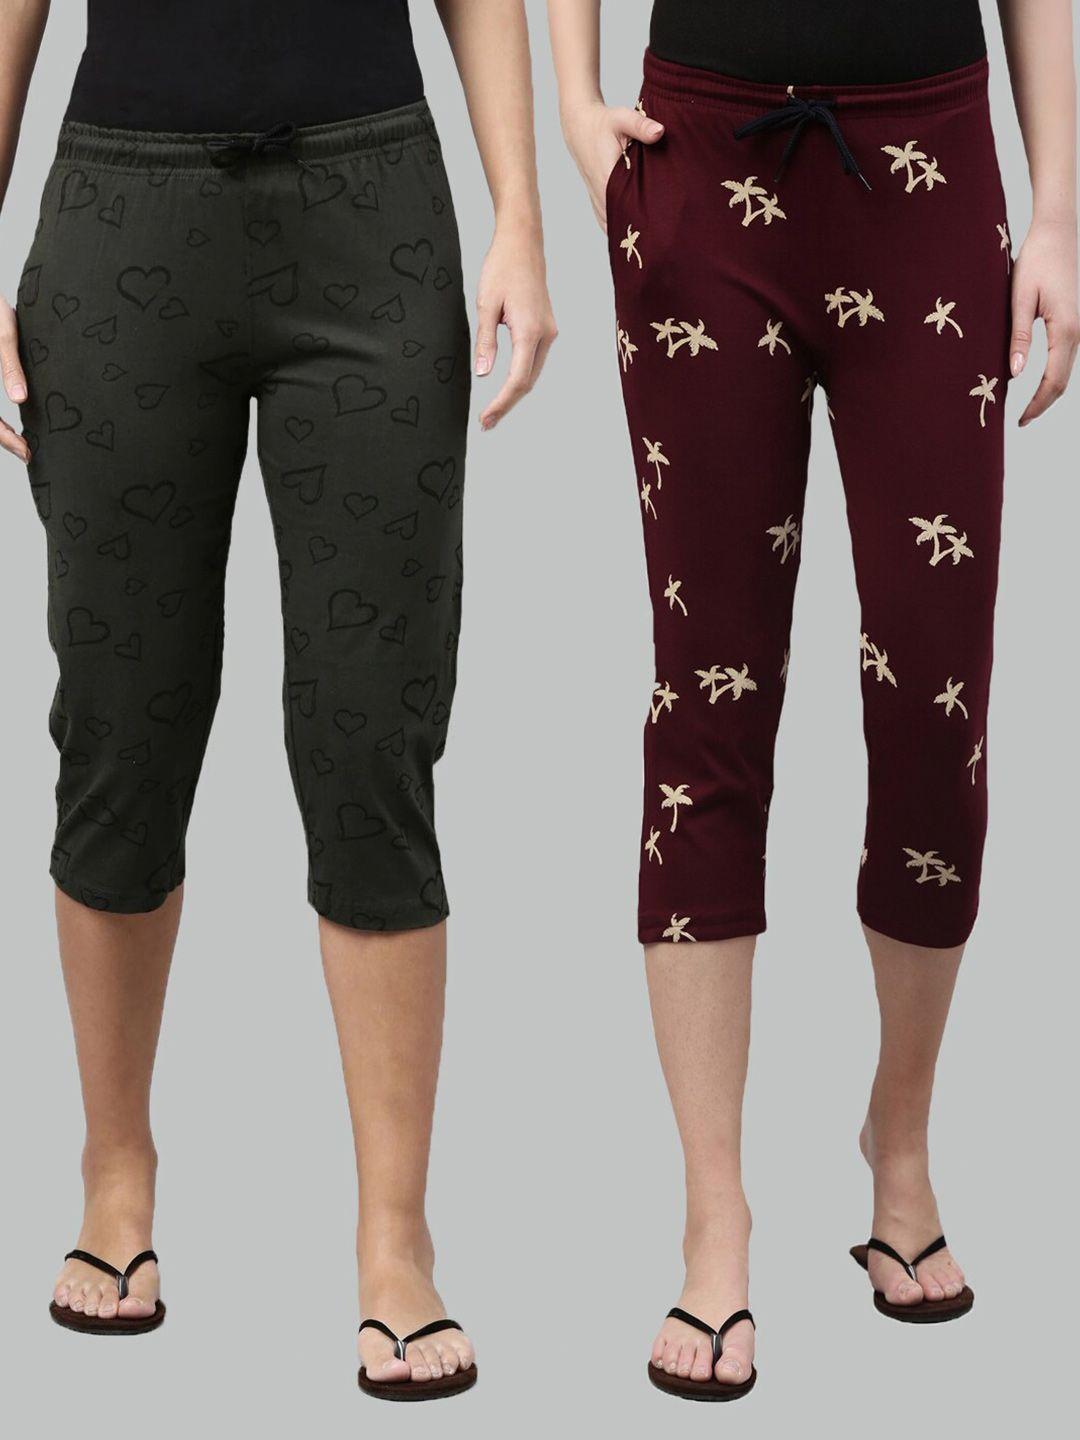 kryptic-women-olive-green-&-maroon-pack-of-2-printed-cotton-capris